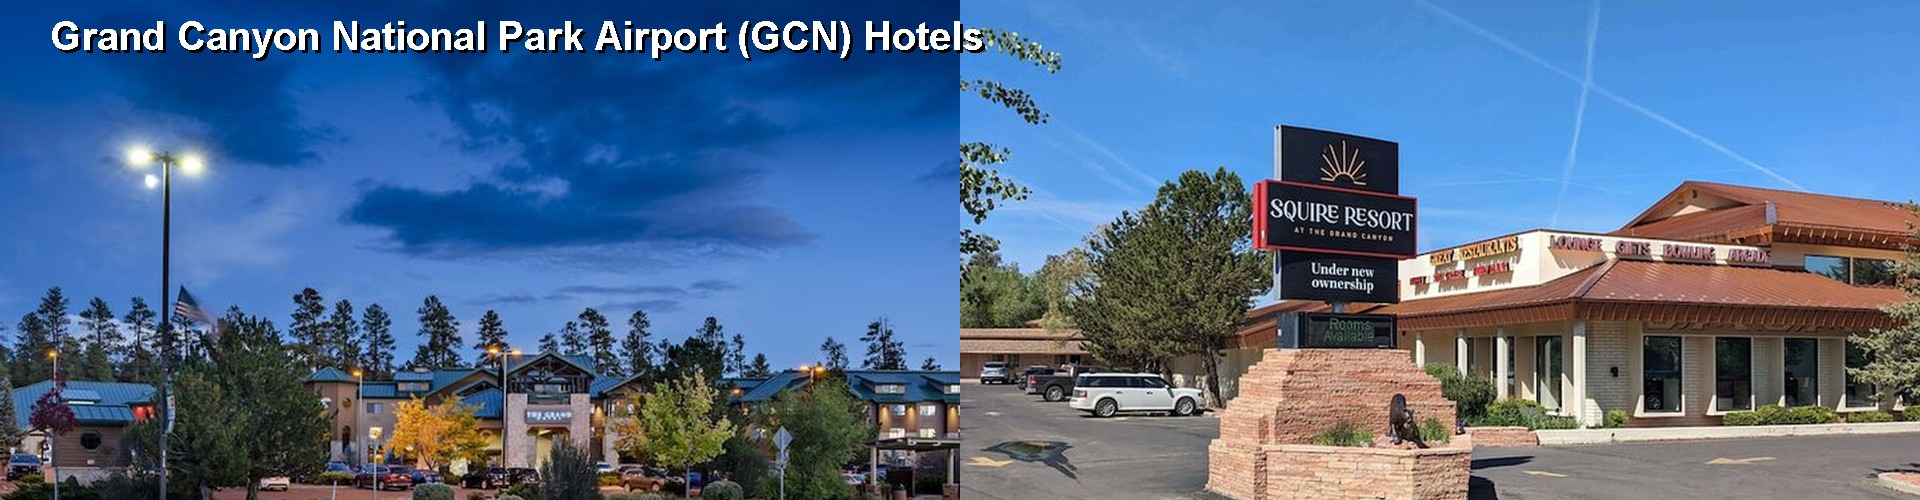 5 Best Hotels near Grand Canyon National Park Airport (GCN)